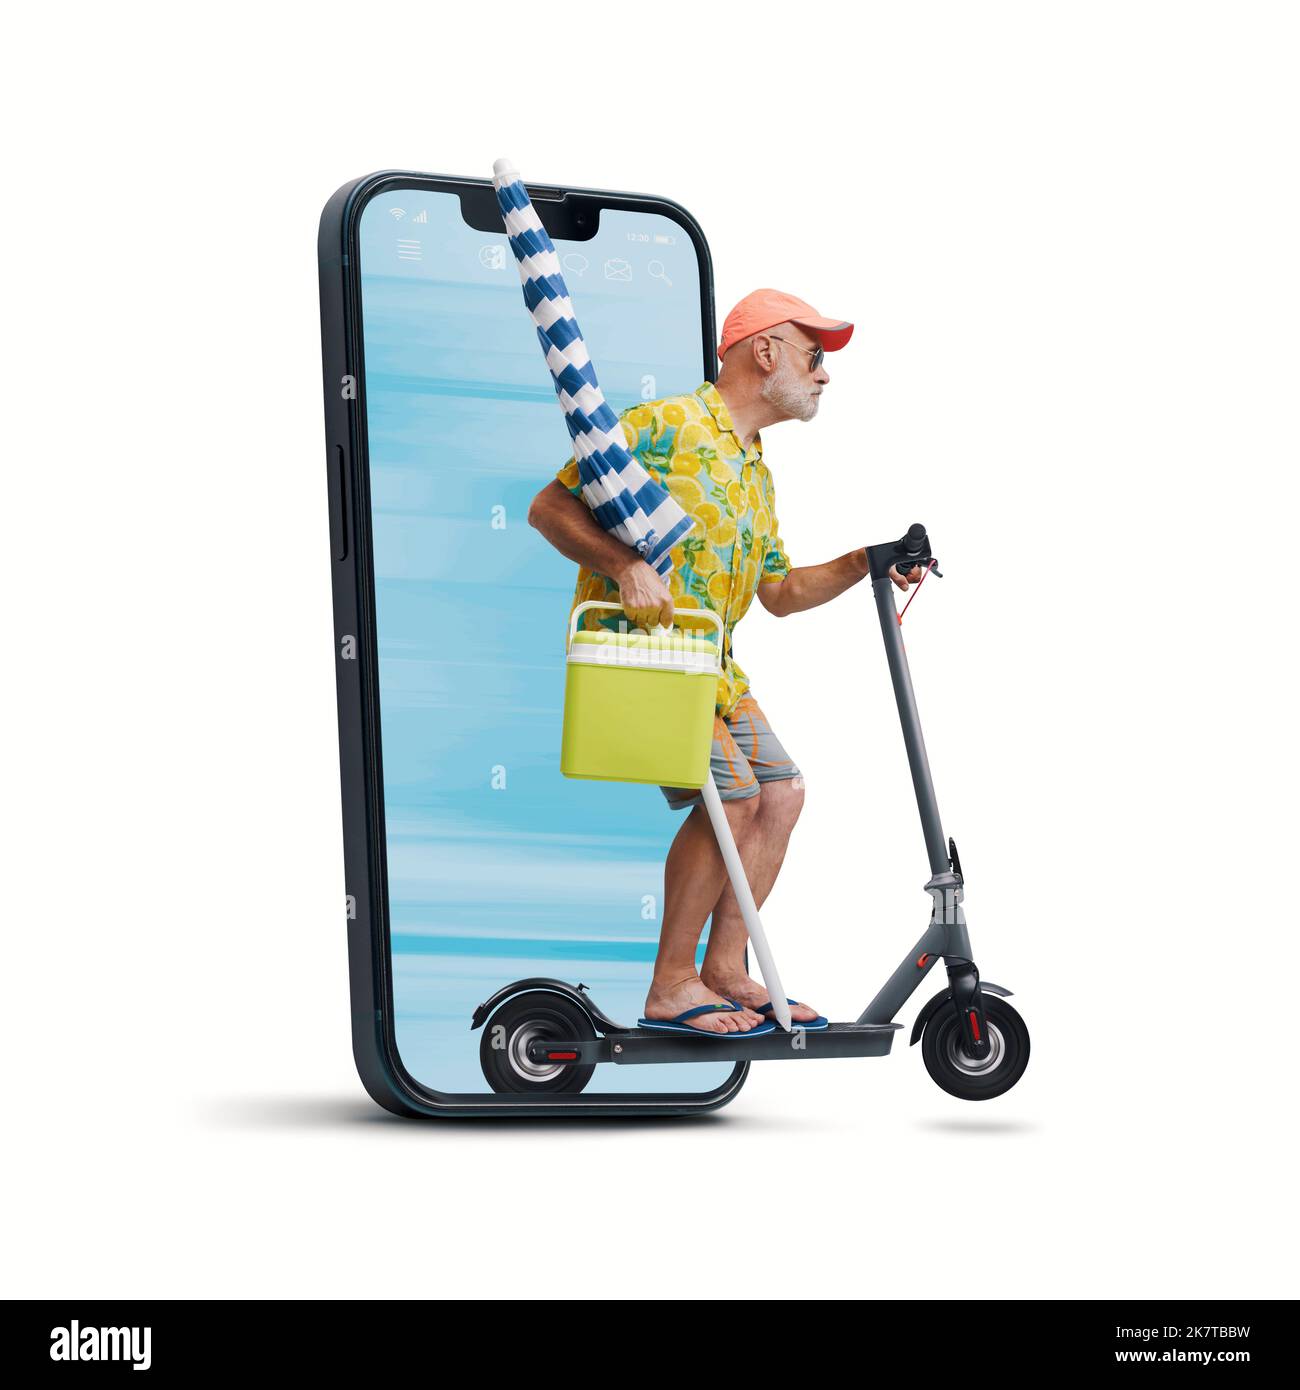 Funny senior tourist riding an electric scooter and going to the beach, he is coming out from a smartphone screen, isolated on white background Stock Photo